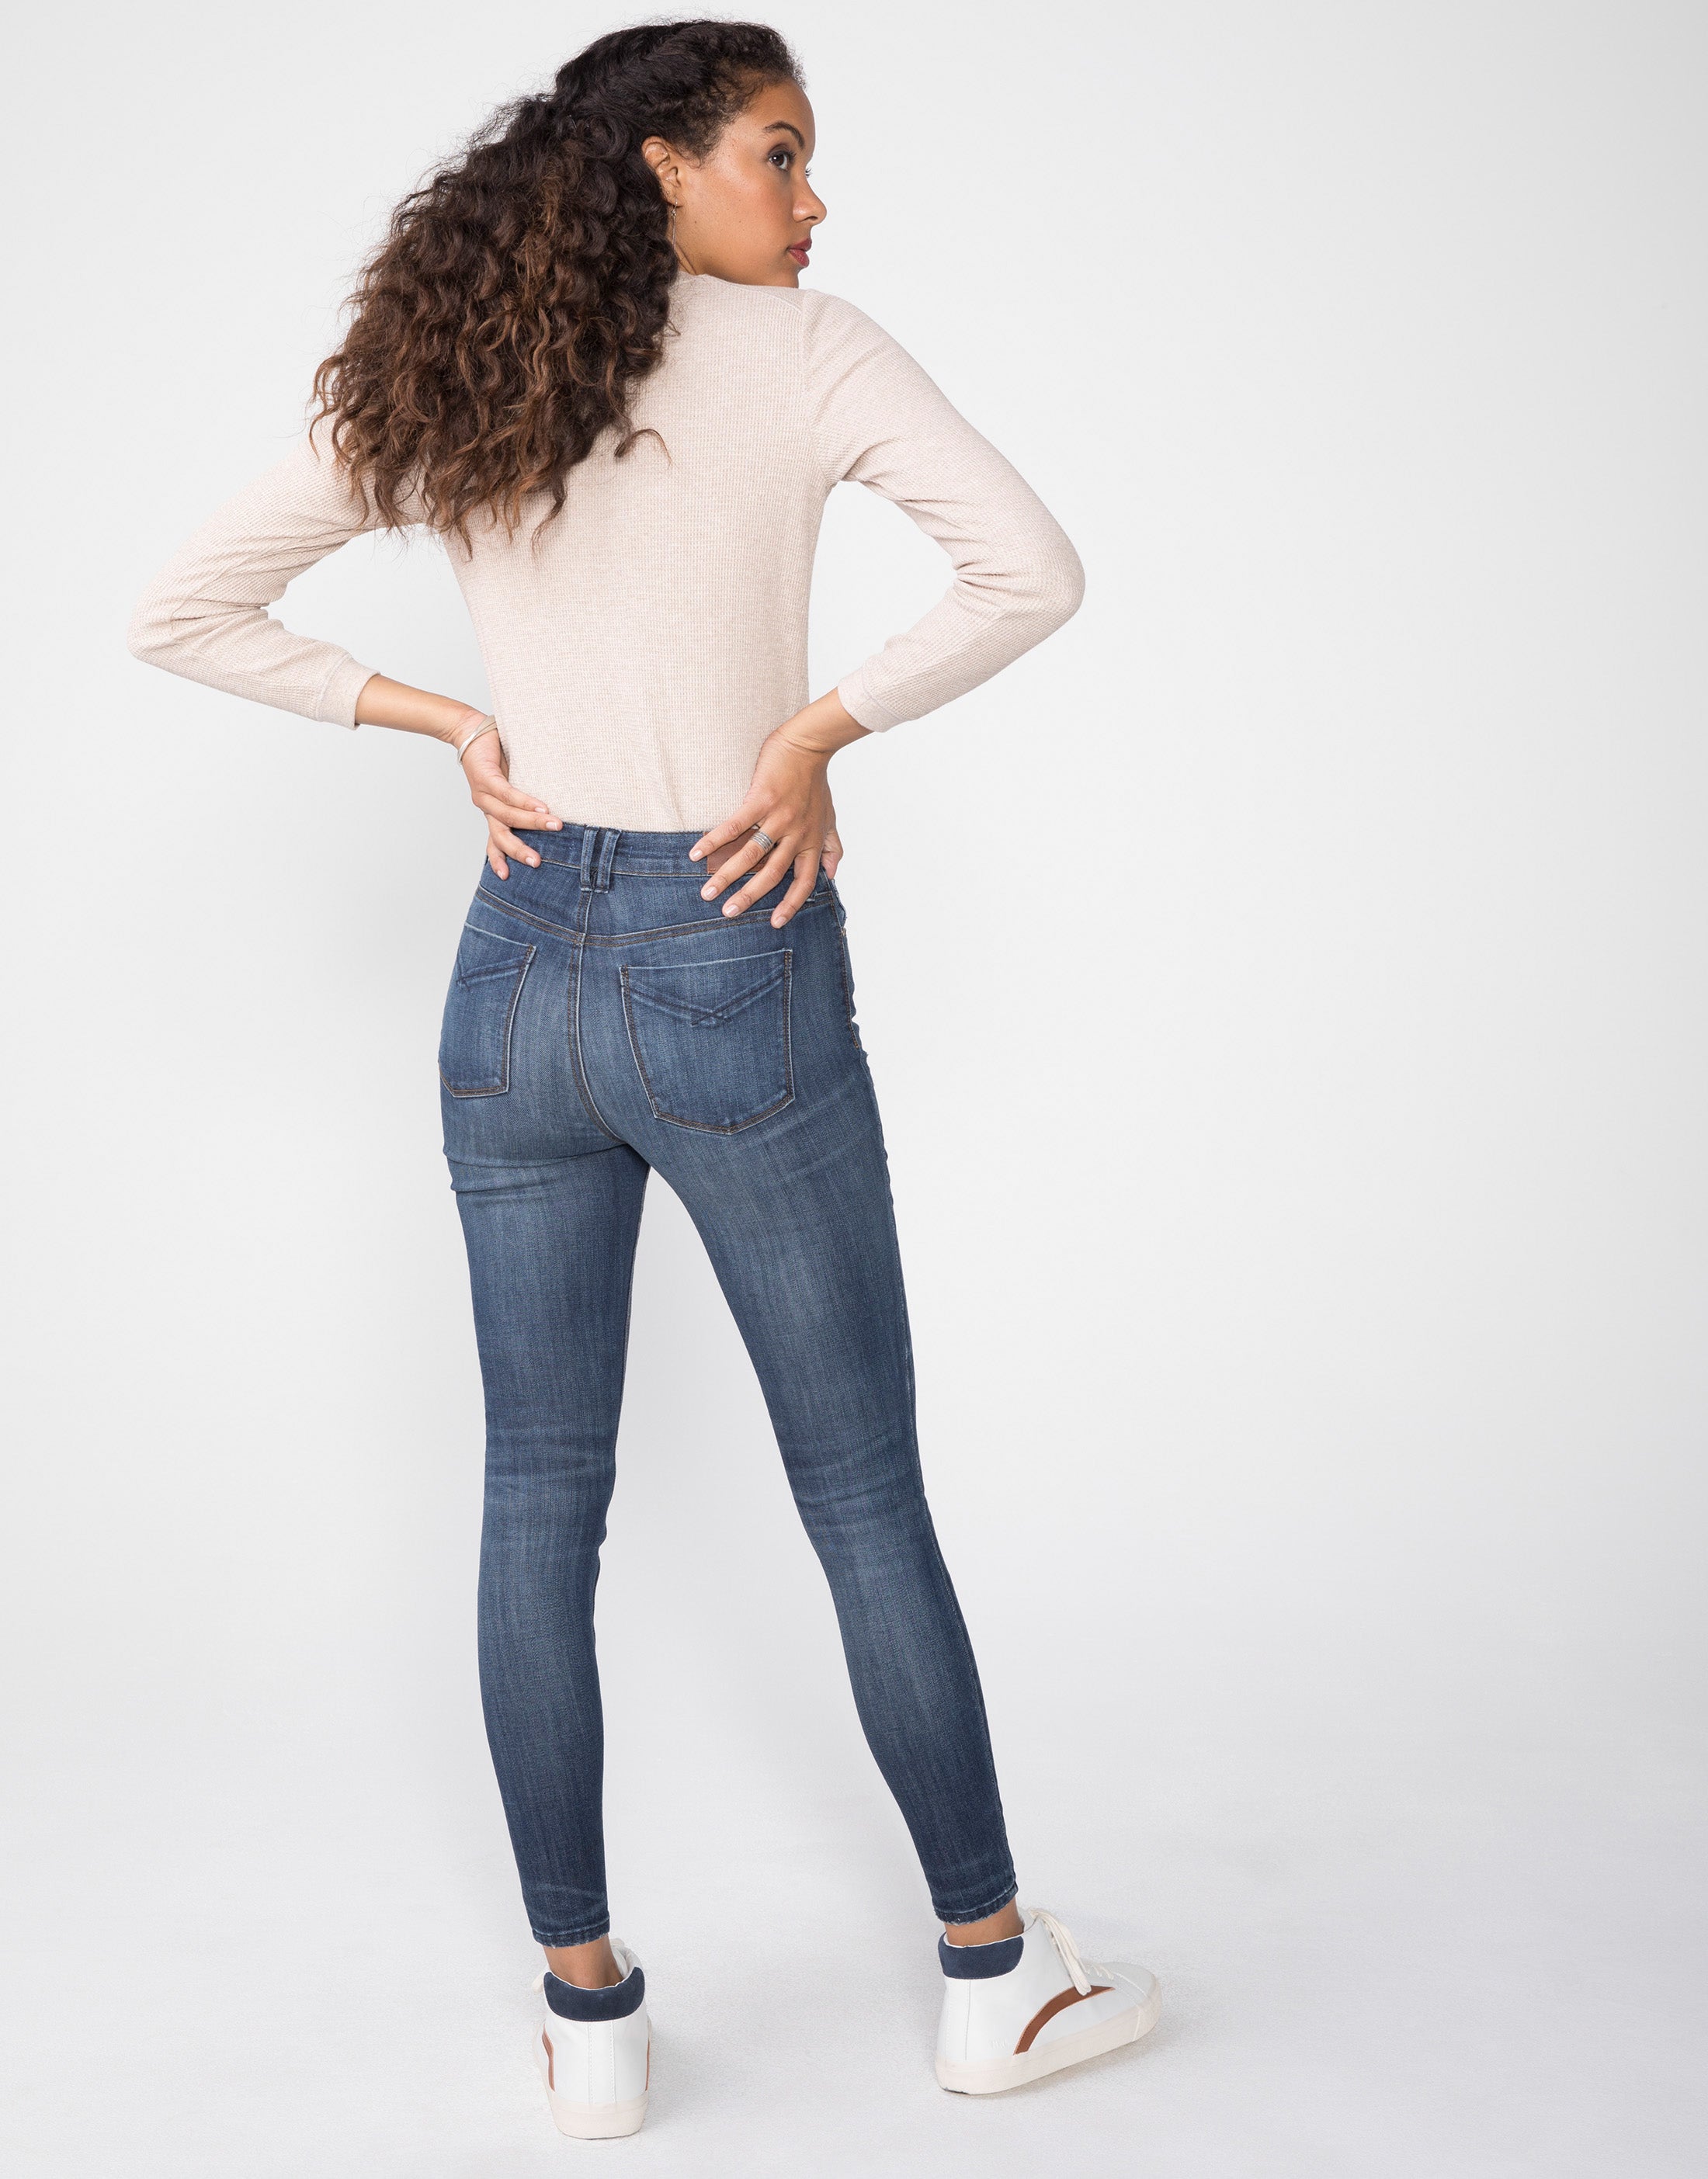 OLIVIA High Rise Skinny in Monterey – Unpublished Collection